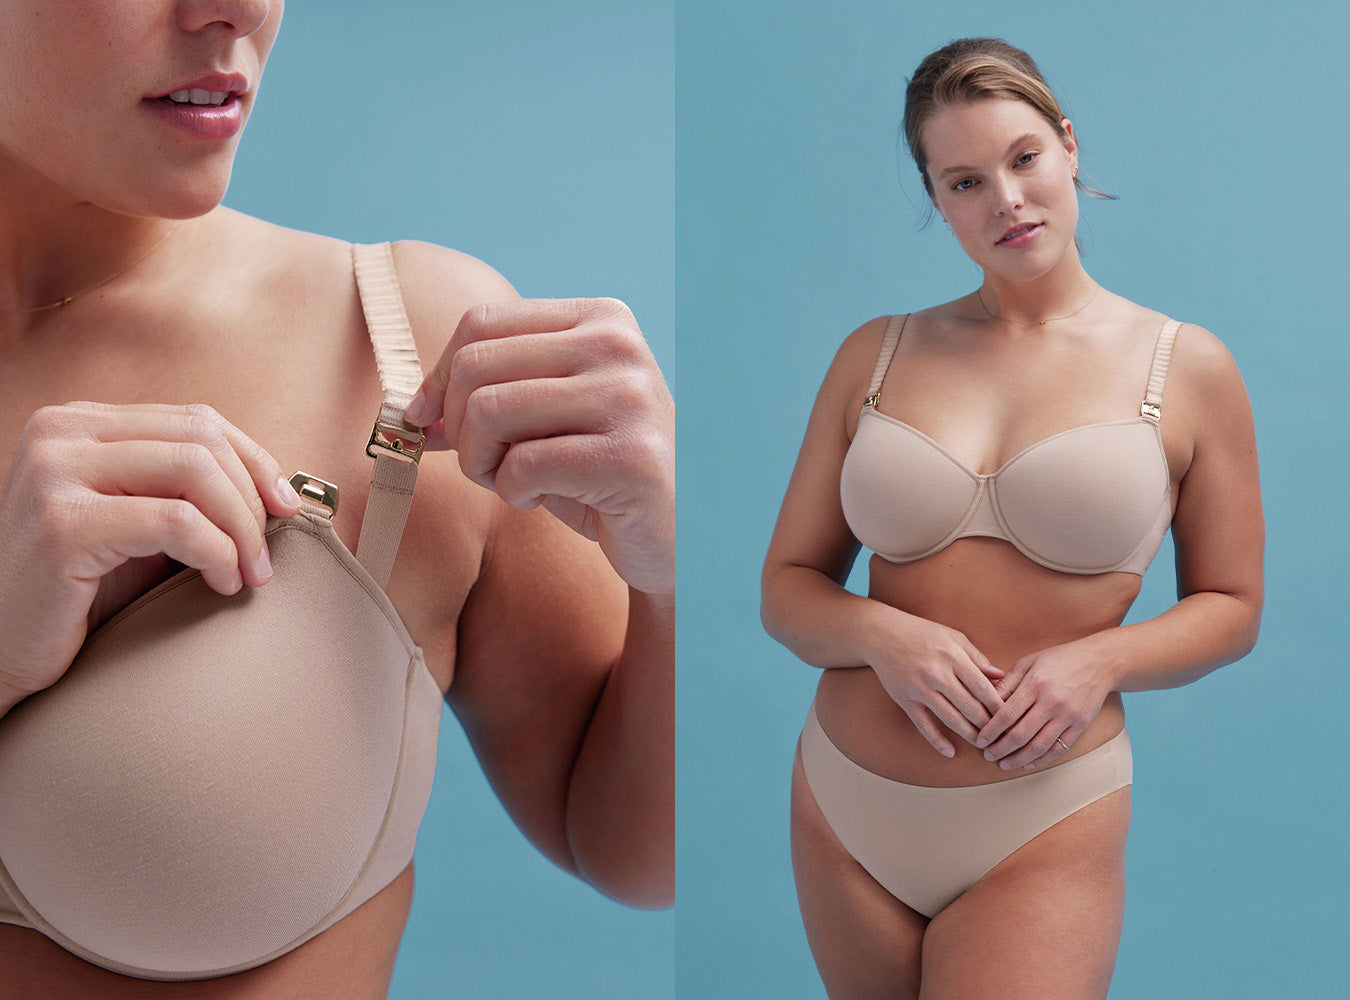 Nursing Bras 101: The Styles Every Mom Needs – Embrace from Adore Me